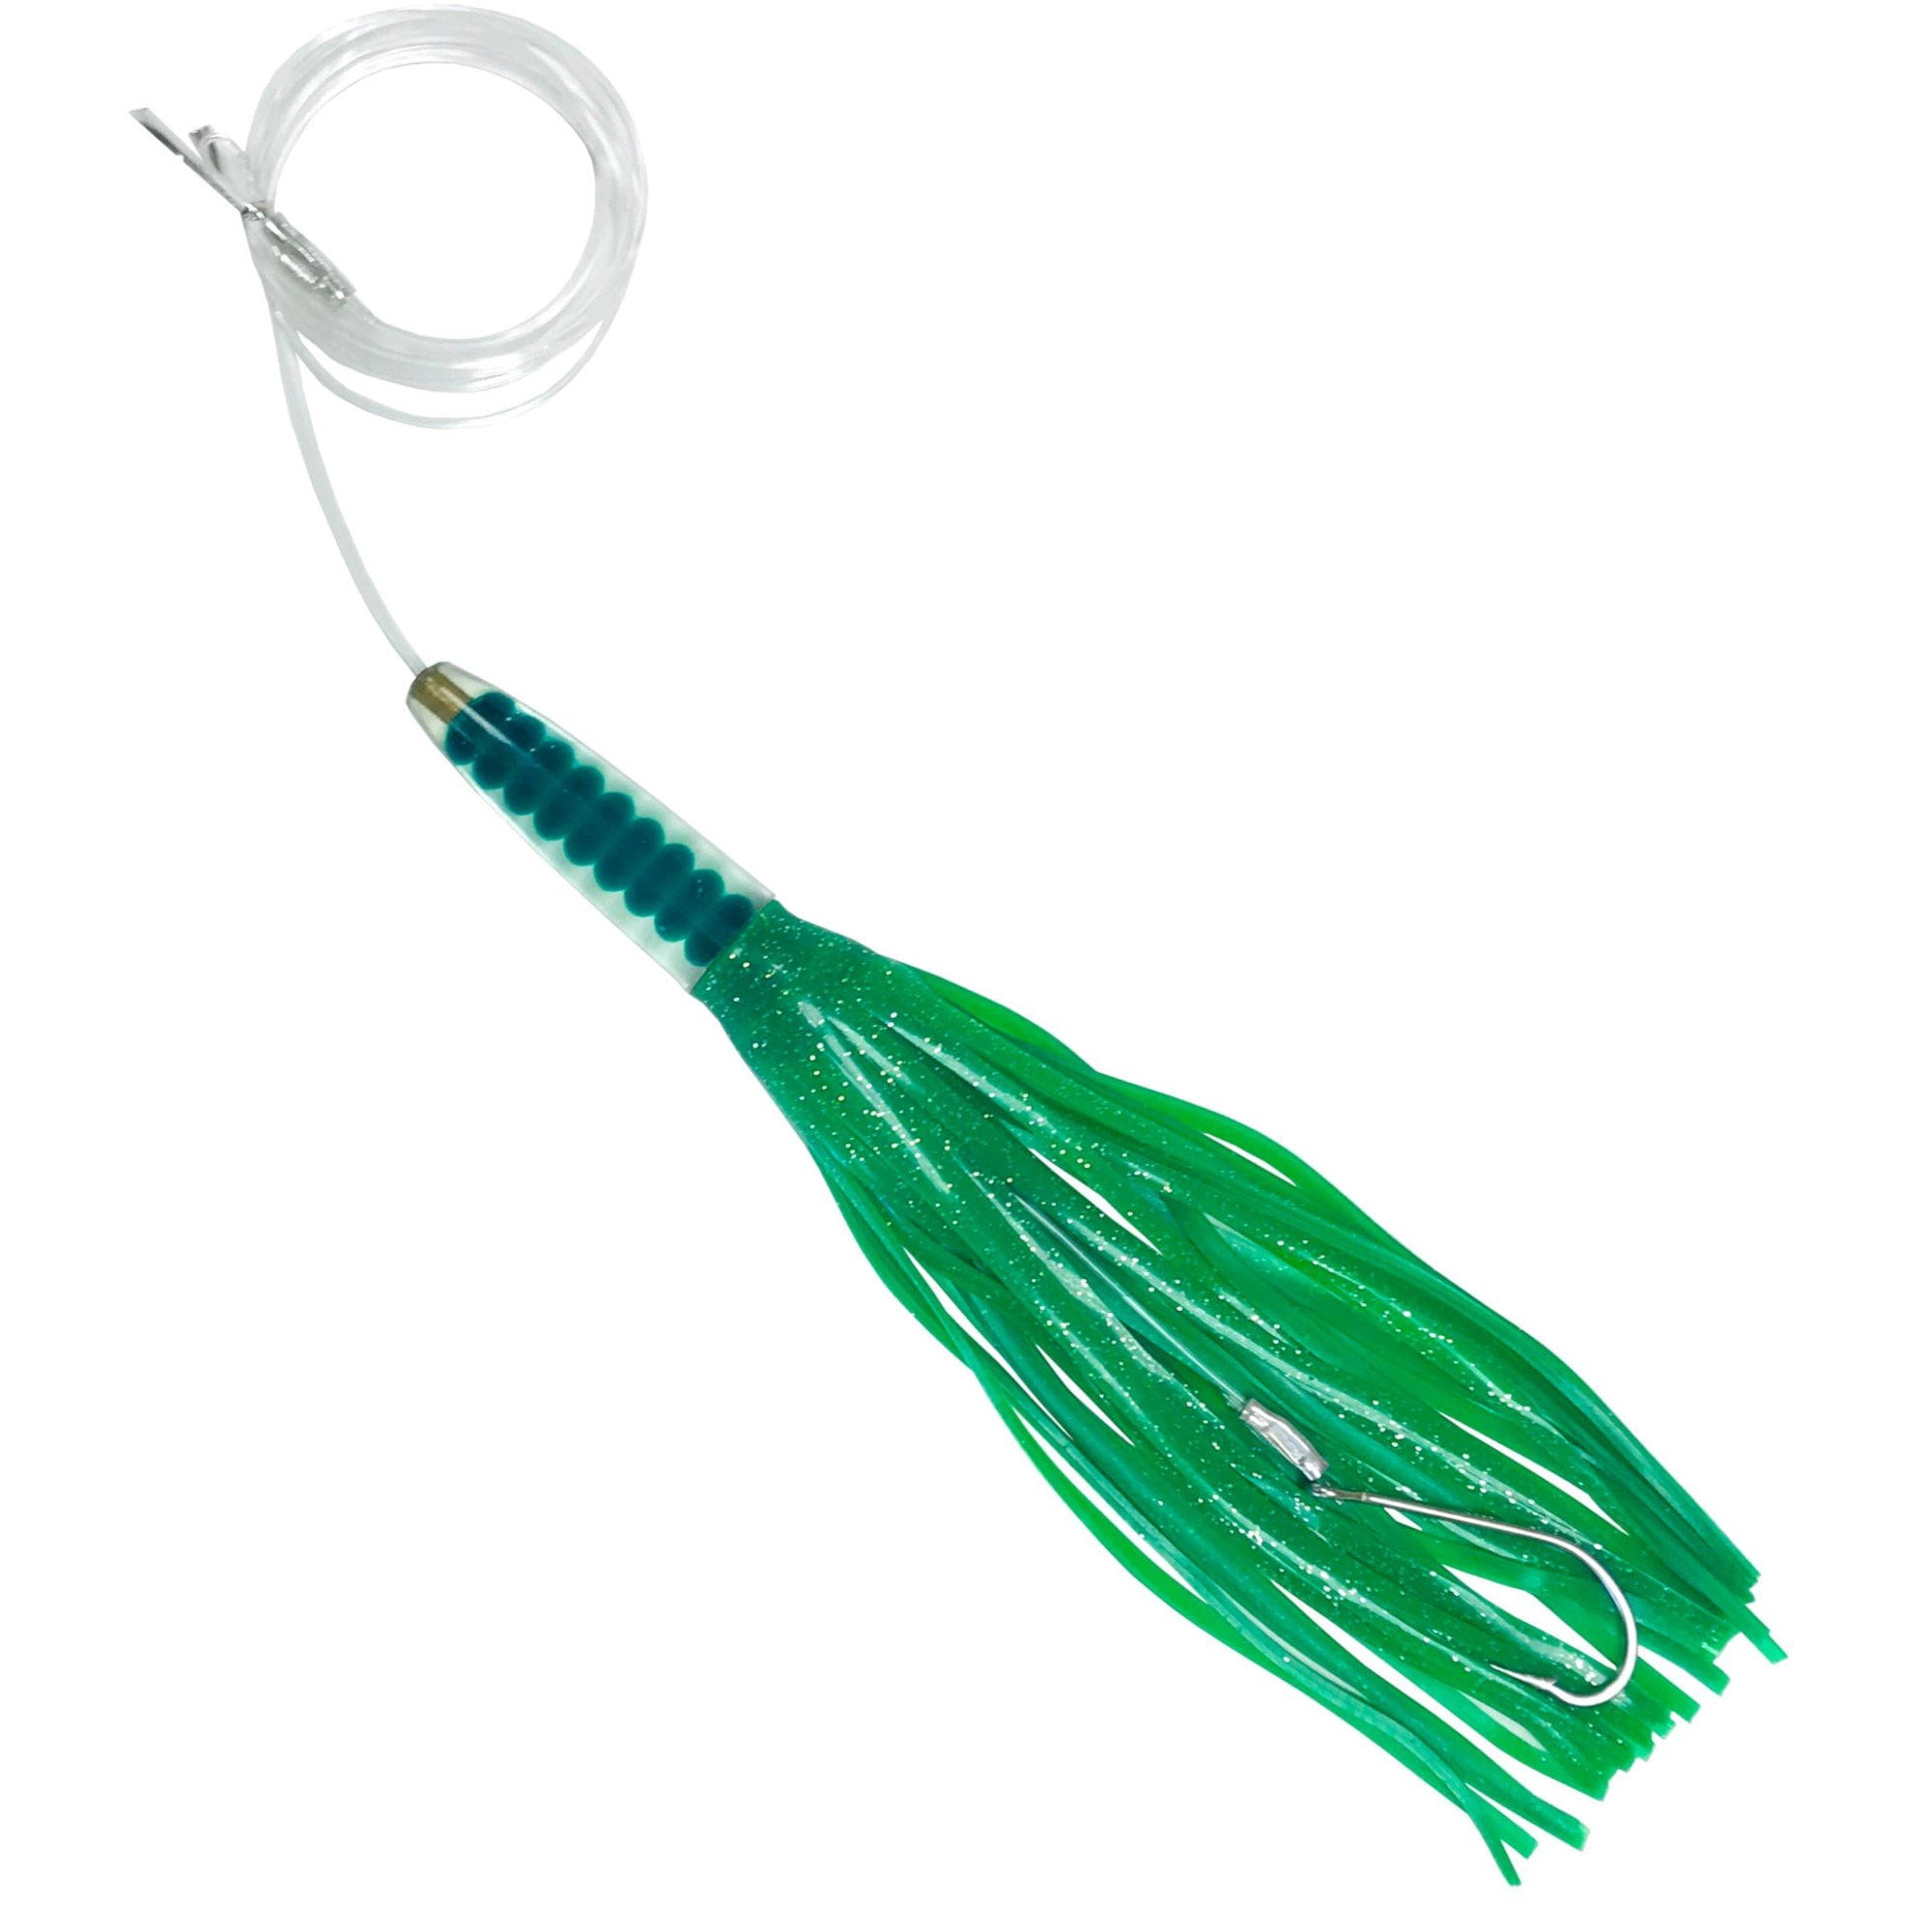 12" RIGGED GREEN MACHINE STYLE TROLLING LURE OFFSHORE AMERICAN FLAG 